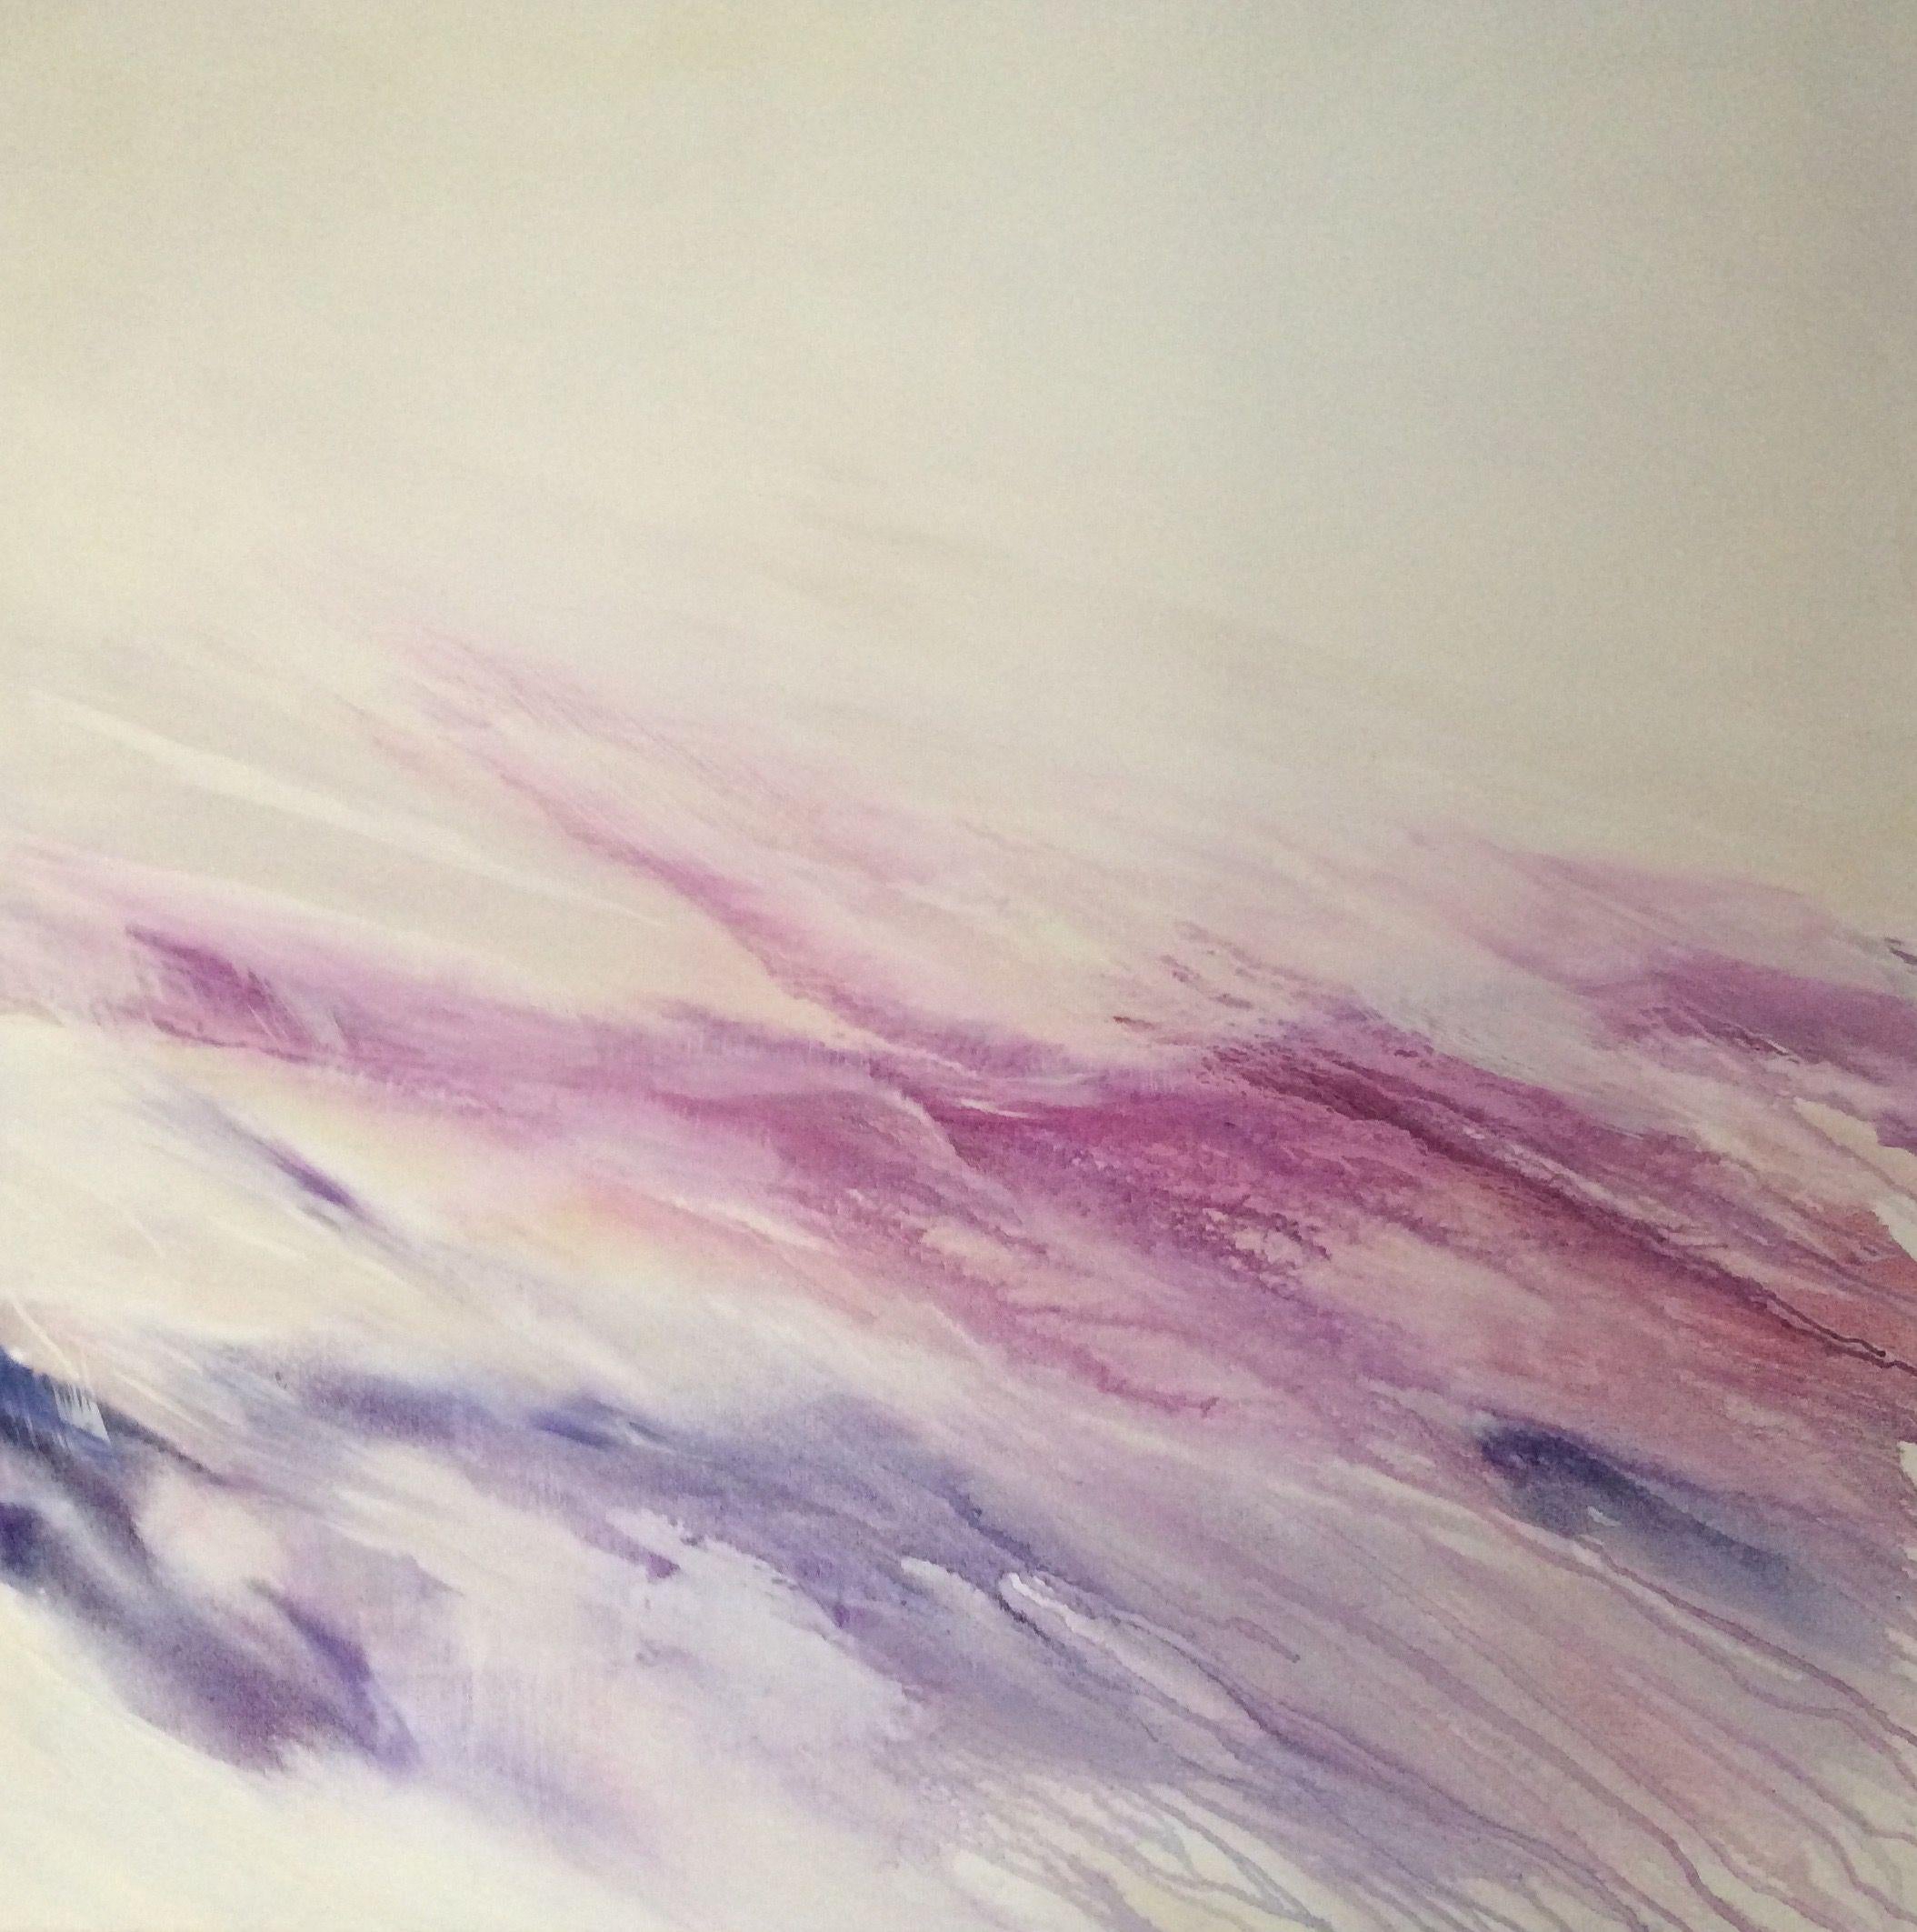 Gesa Reuter Abstract Drawing – Traces of Tranquility, Gemälde, Aquarell auf Leinwand